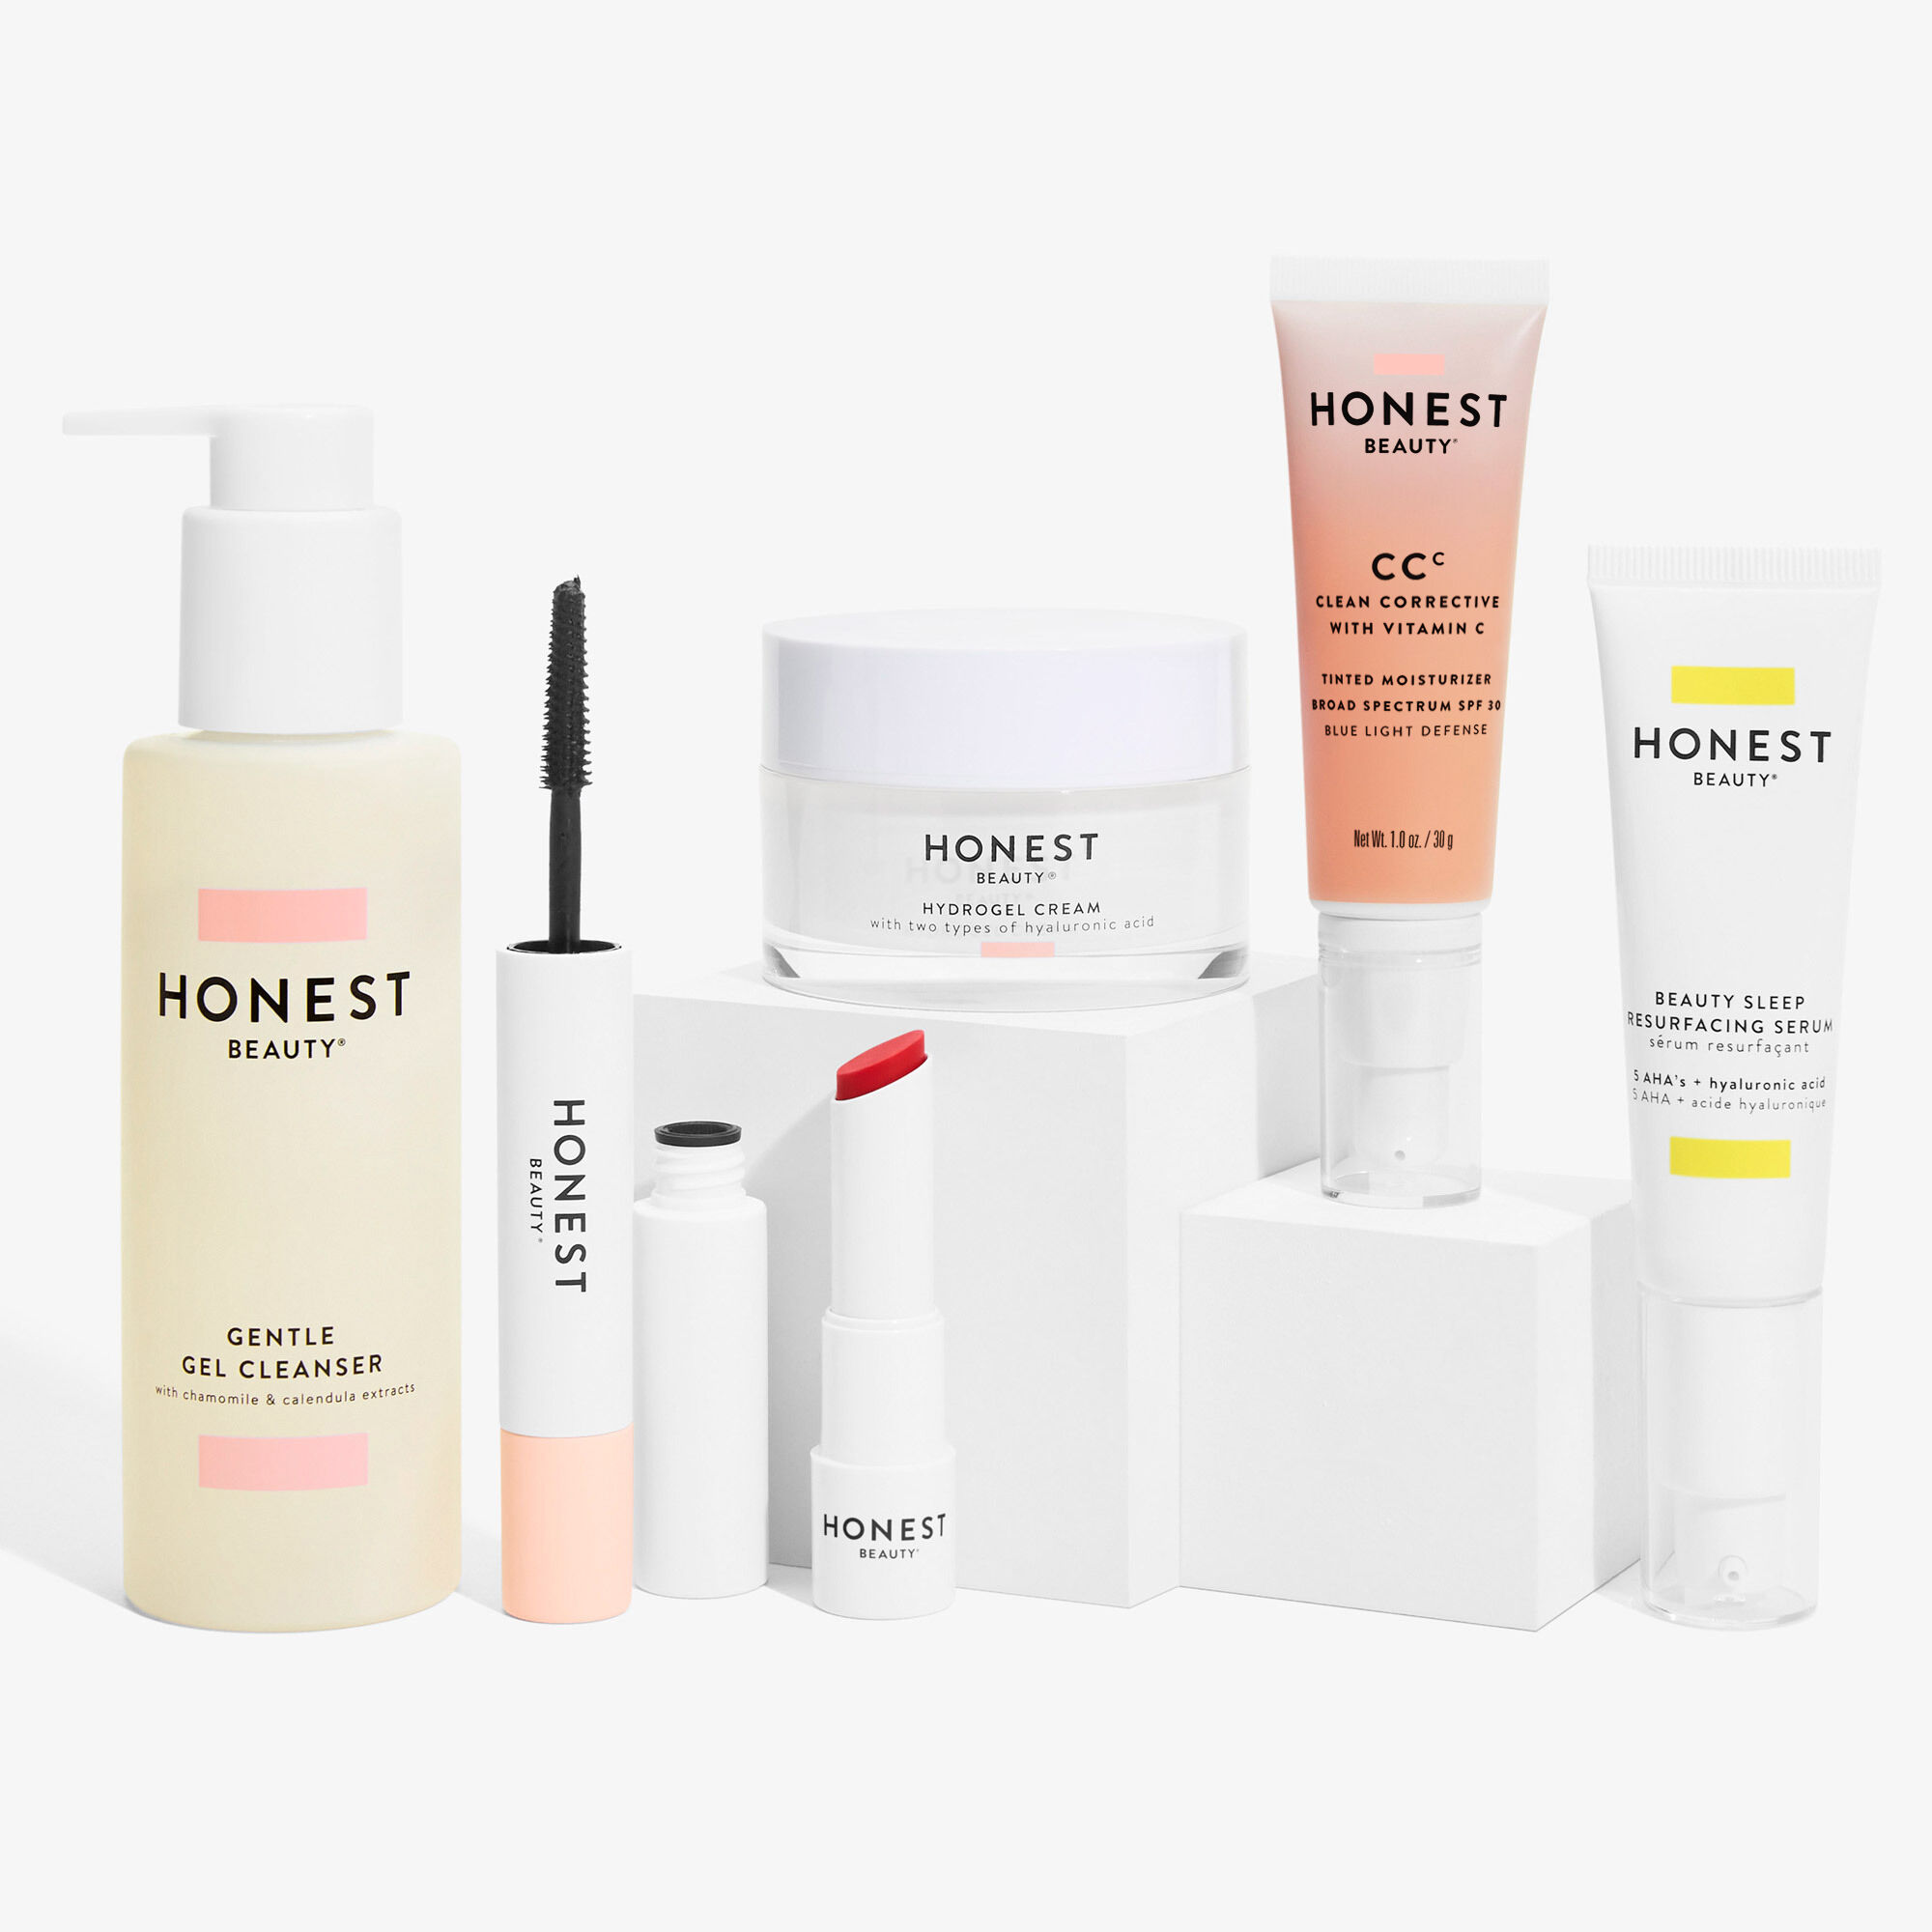 Honest Beauty Reviews: Is Their Clean Beauty Better?